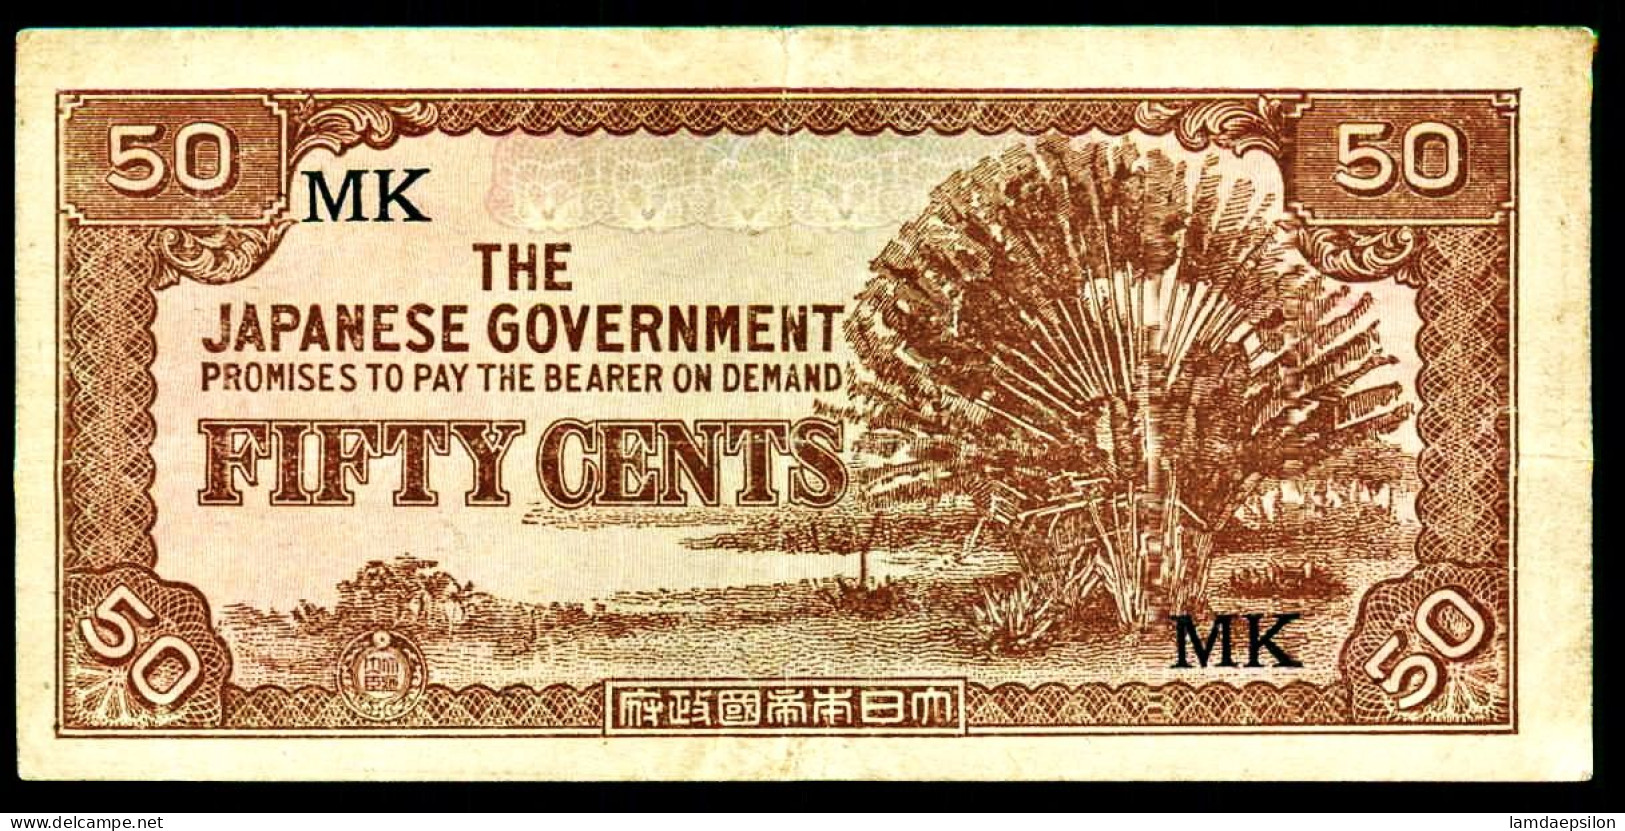 A9  MALAYSIA   BILLETS DU MONDE  THE JAPANESE GOVERNMENT  BANKNOTES  50 CENTS 1942 - Malaysie